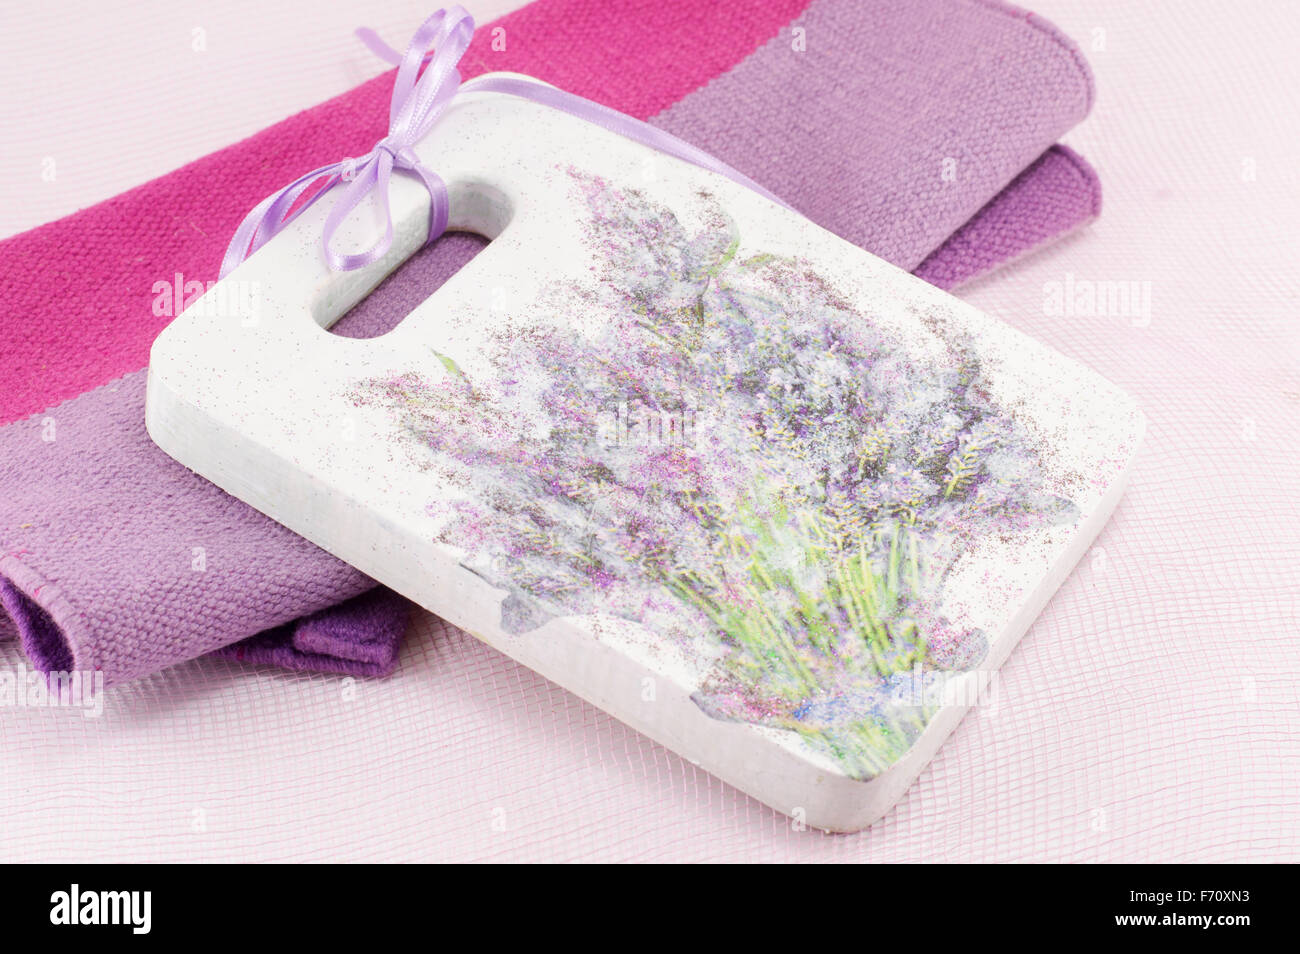 Decoupage decorated tray with flower pattern against soft pink background Stock Photo